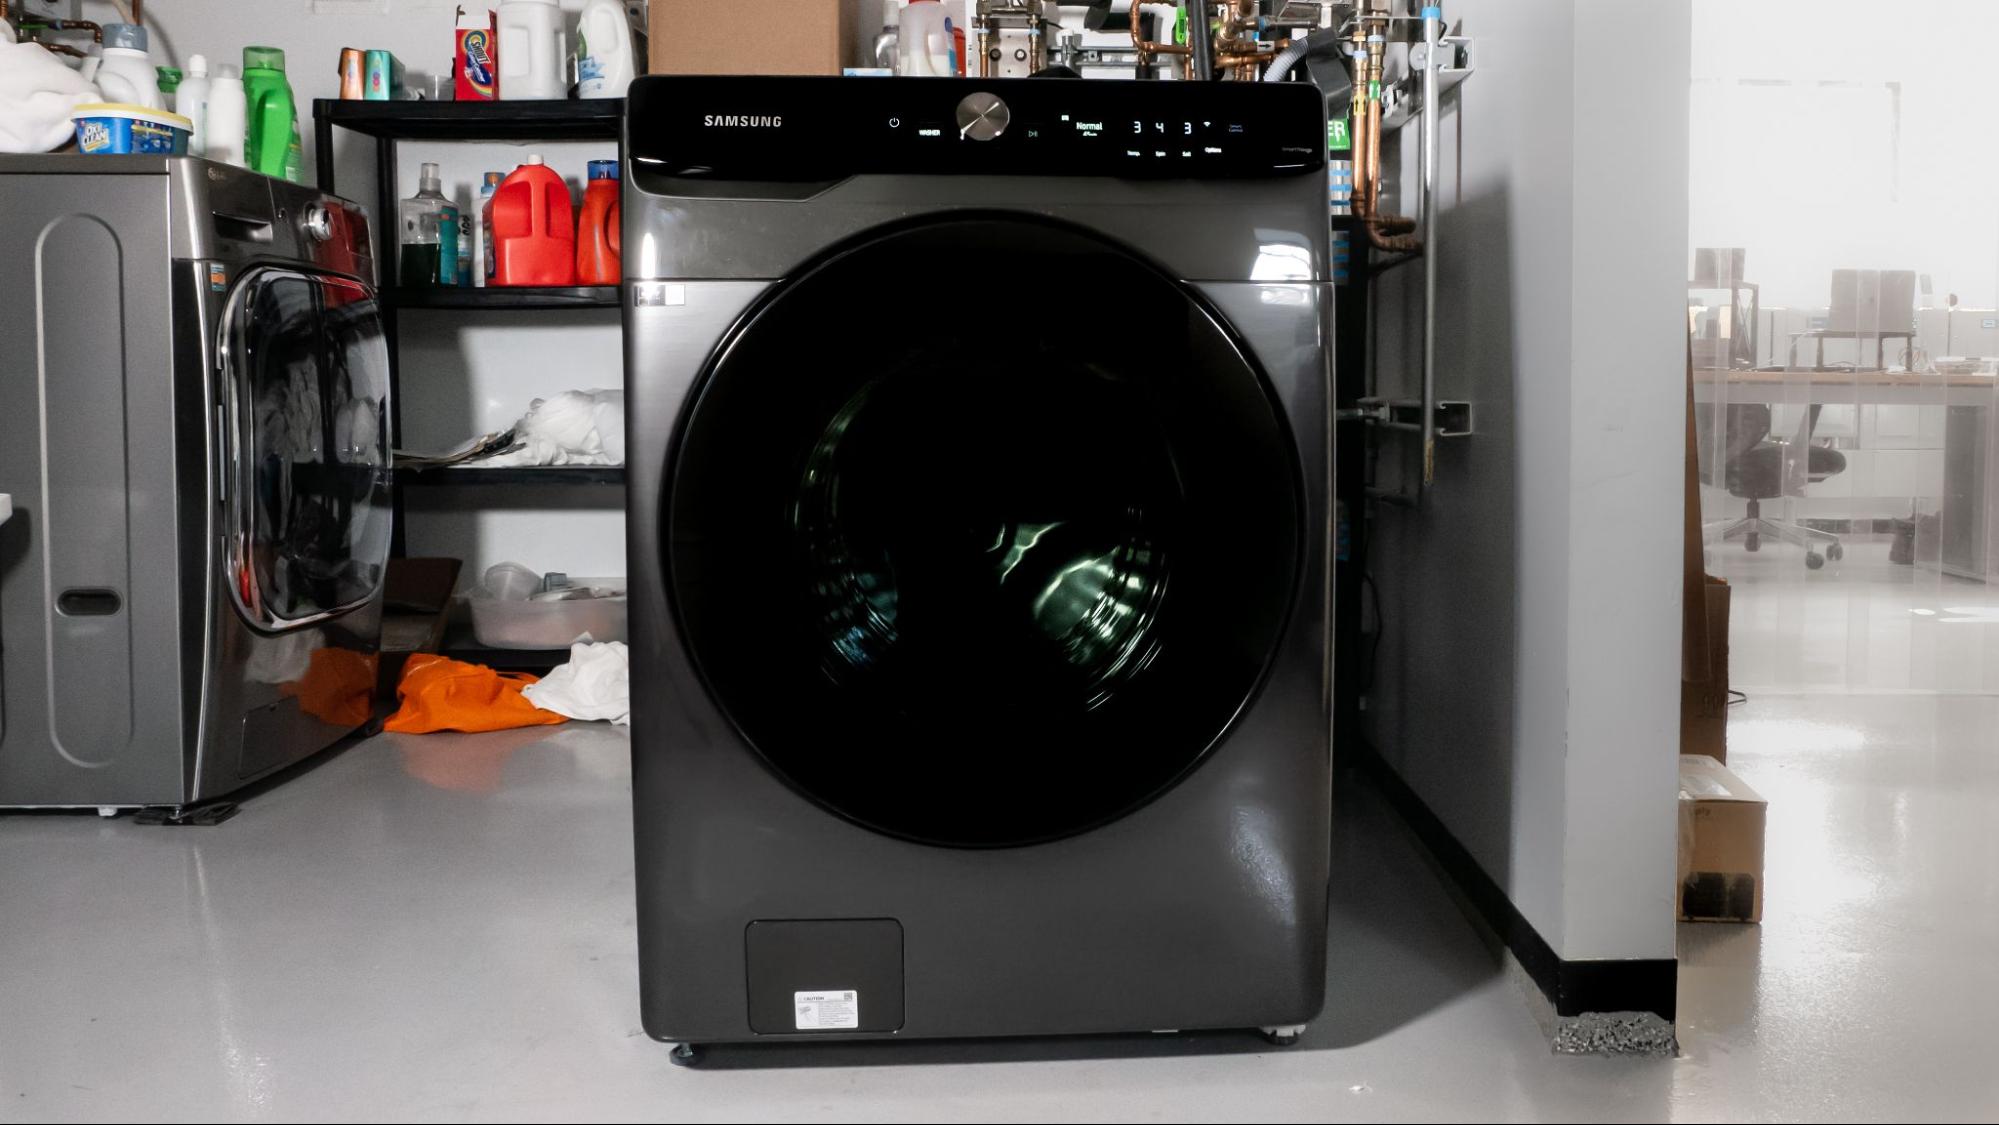 The Samsung WF50A8600AV washing machine set up in our laundry testing lab.